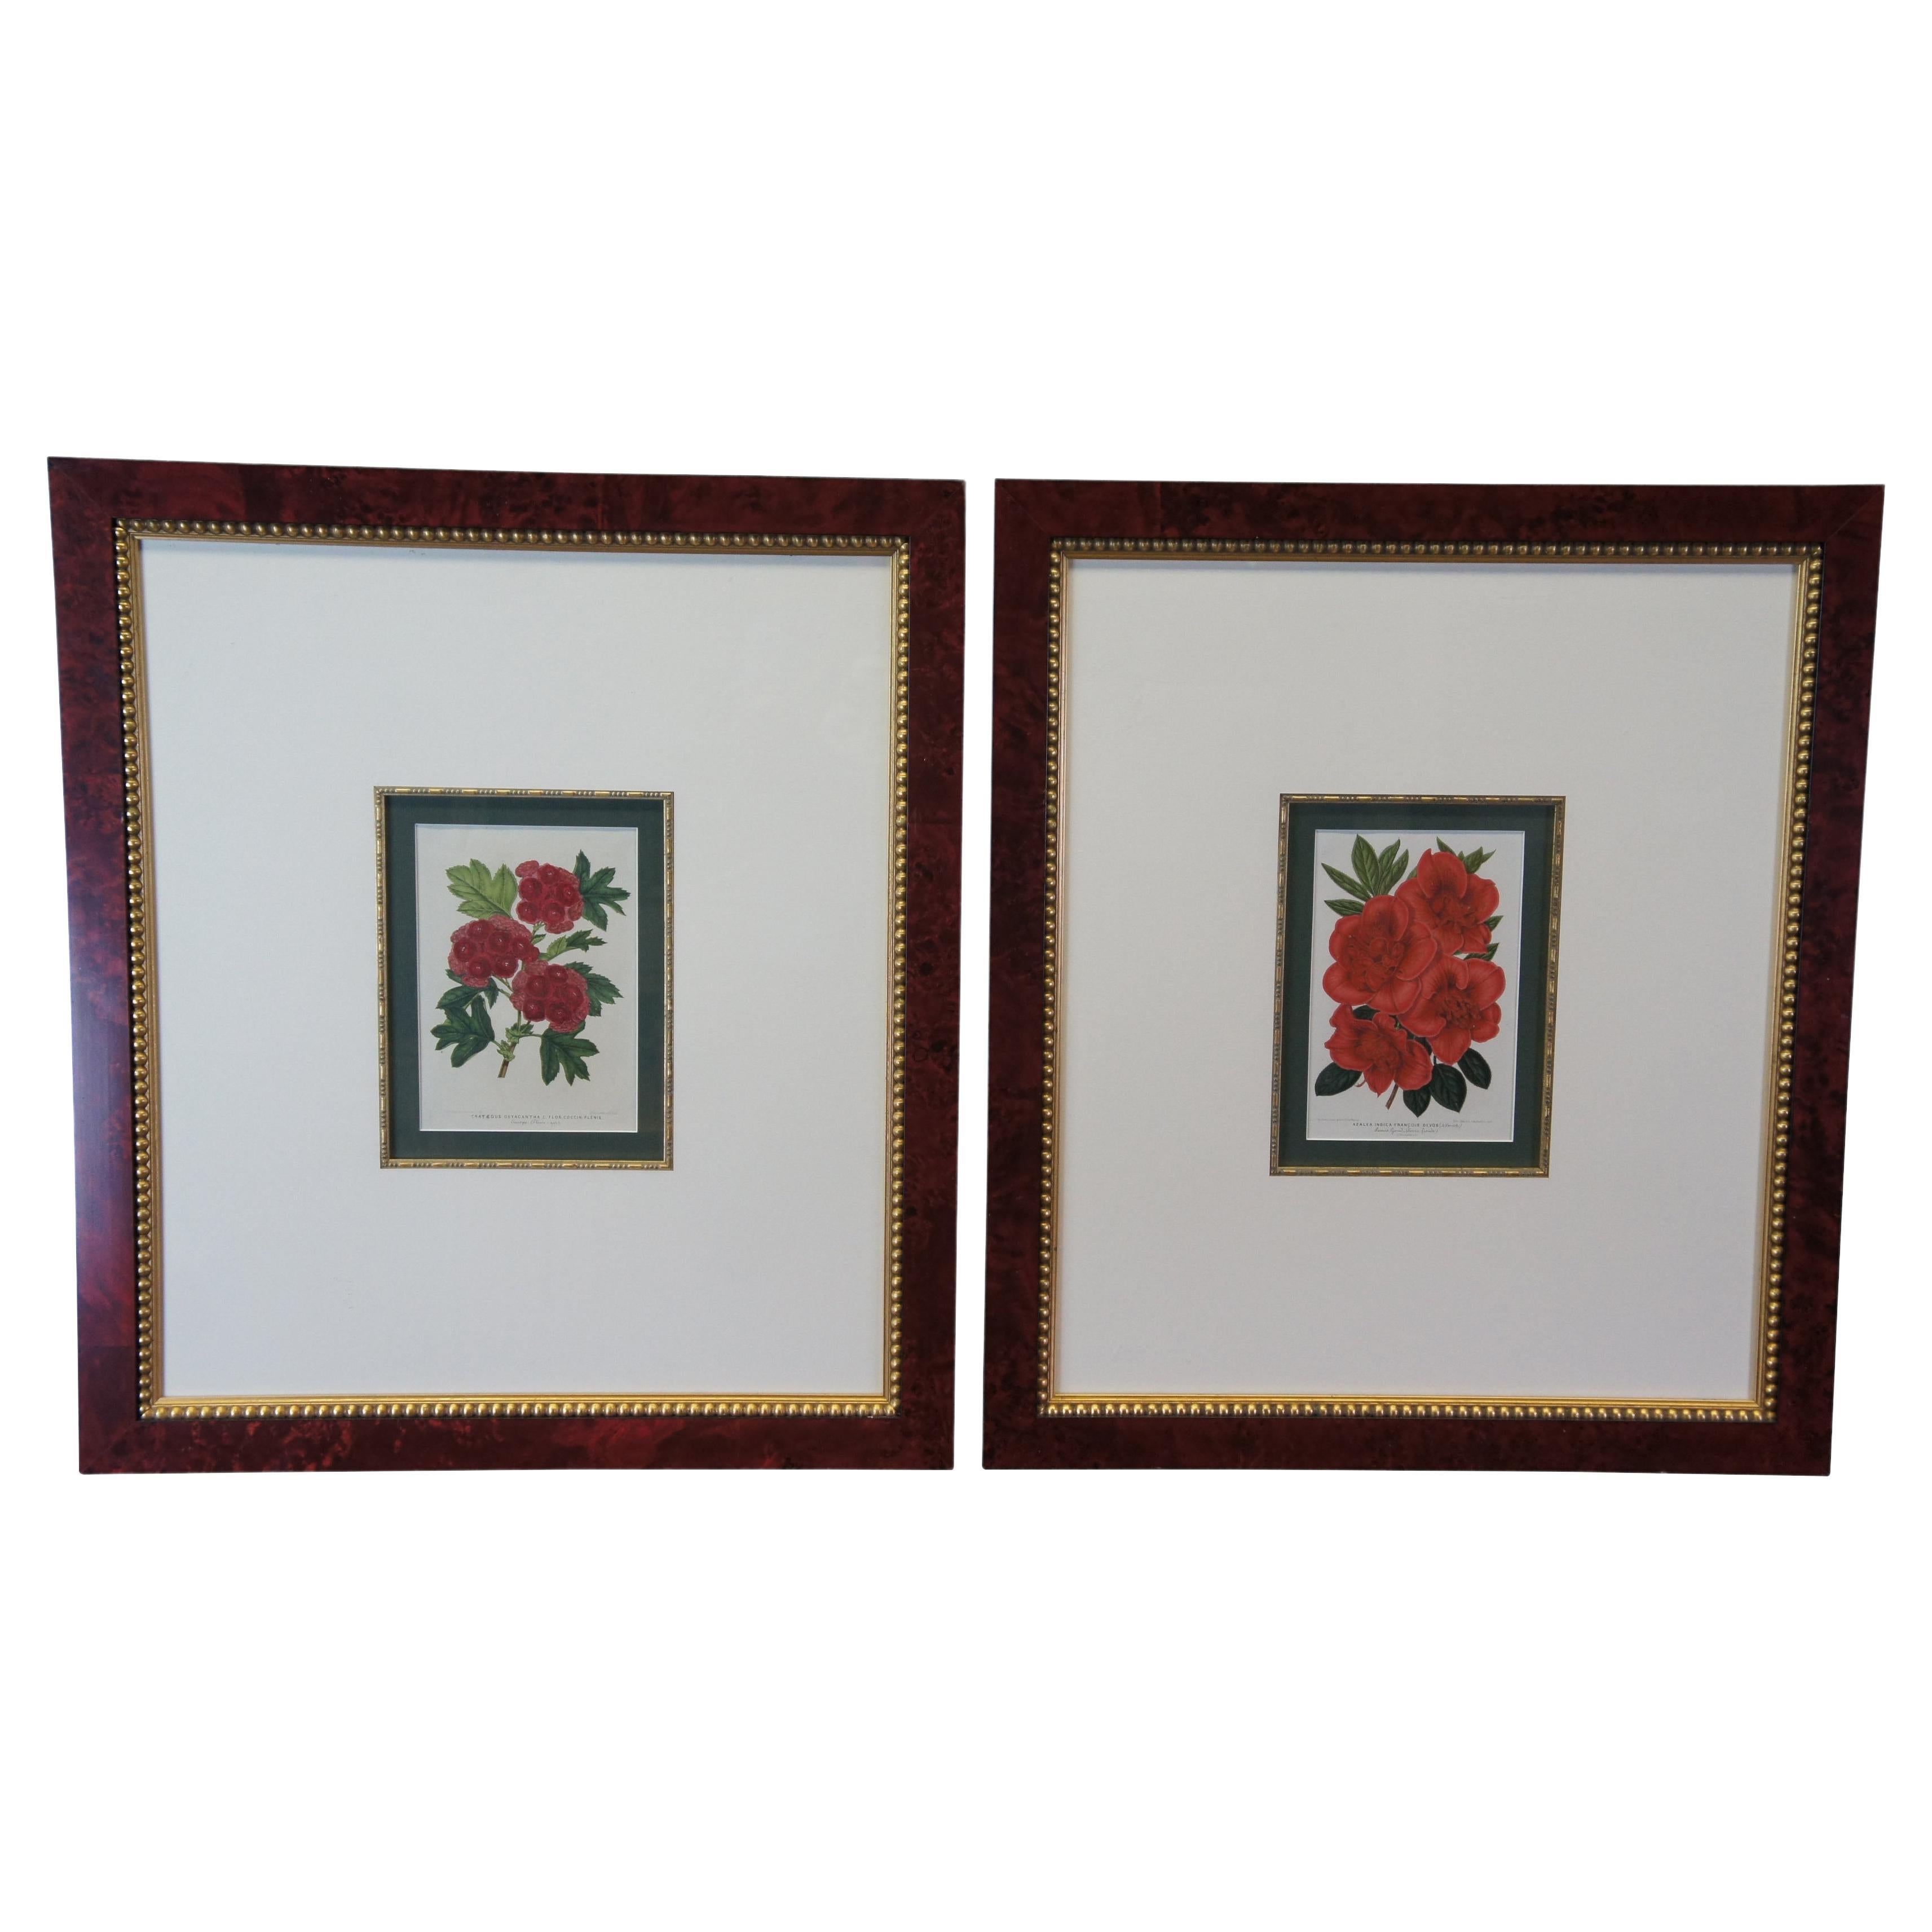 2 Horto Van Houtteano Framed Botanical Tropical Colored Lithograph Prints Plants For Sale